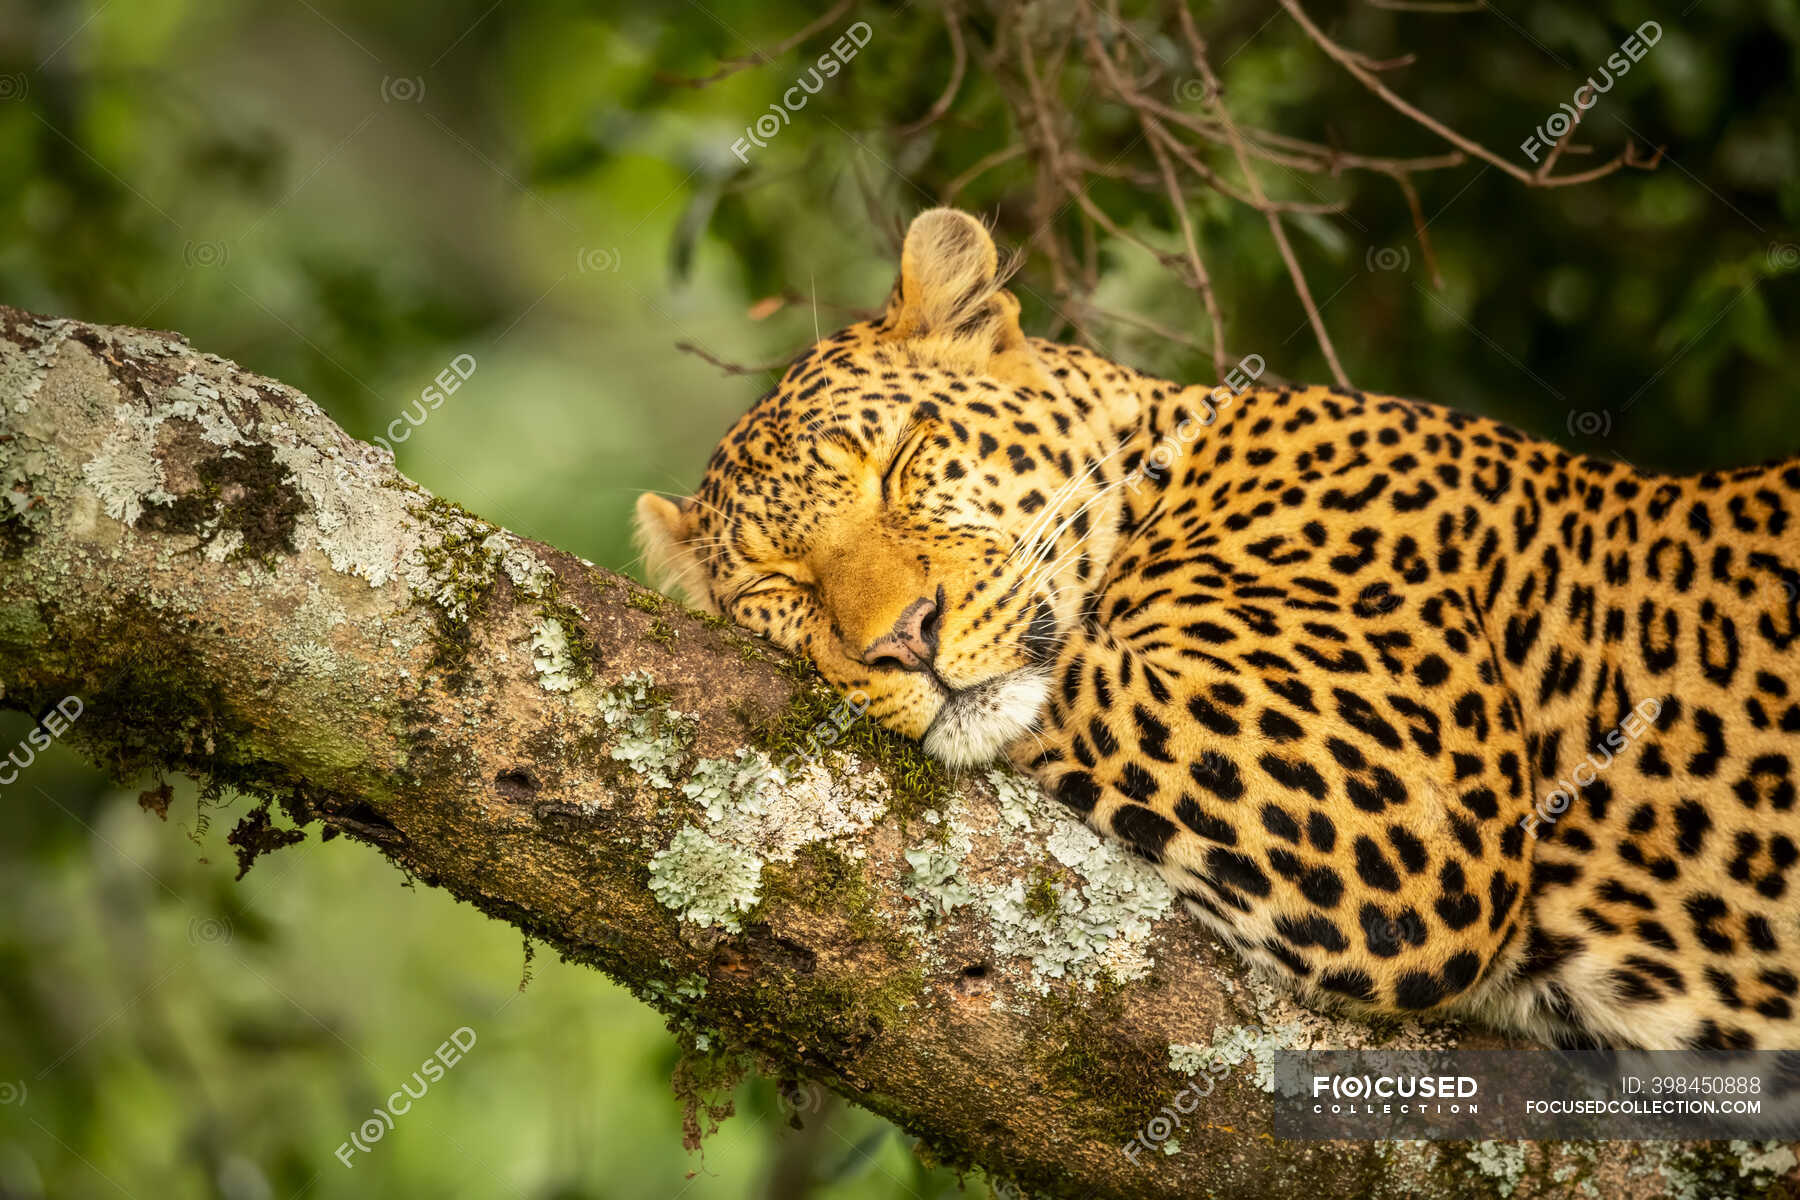 Close-up of a leopard (Panthera pardus) lying on tree branch sleeping;  Kenya — Lying Down, tourism - Stock Photo | #398450888